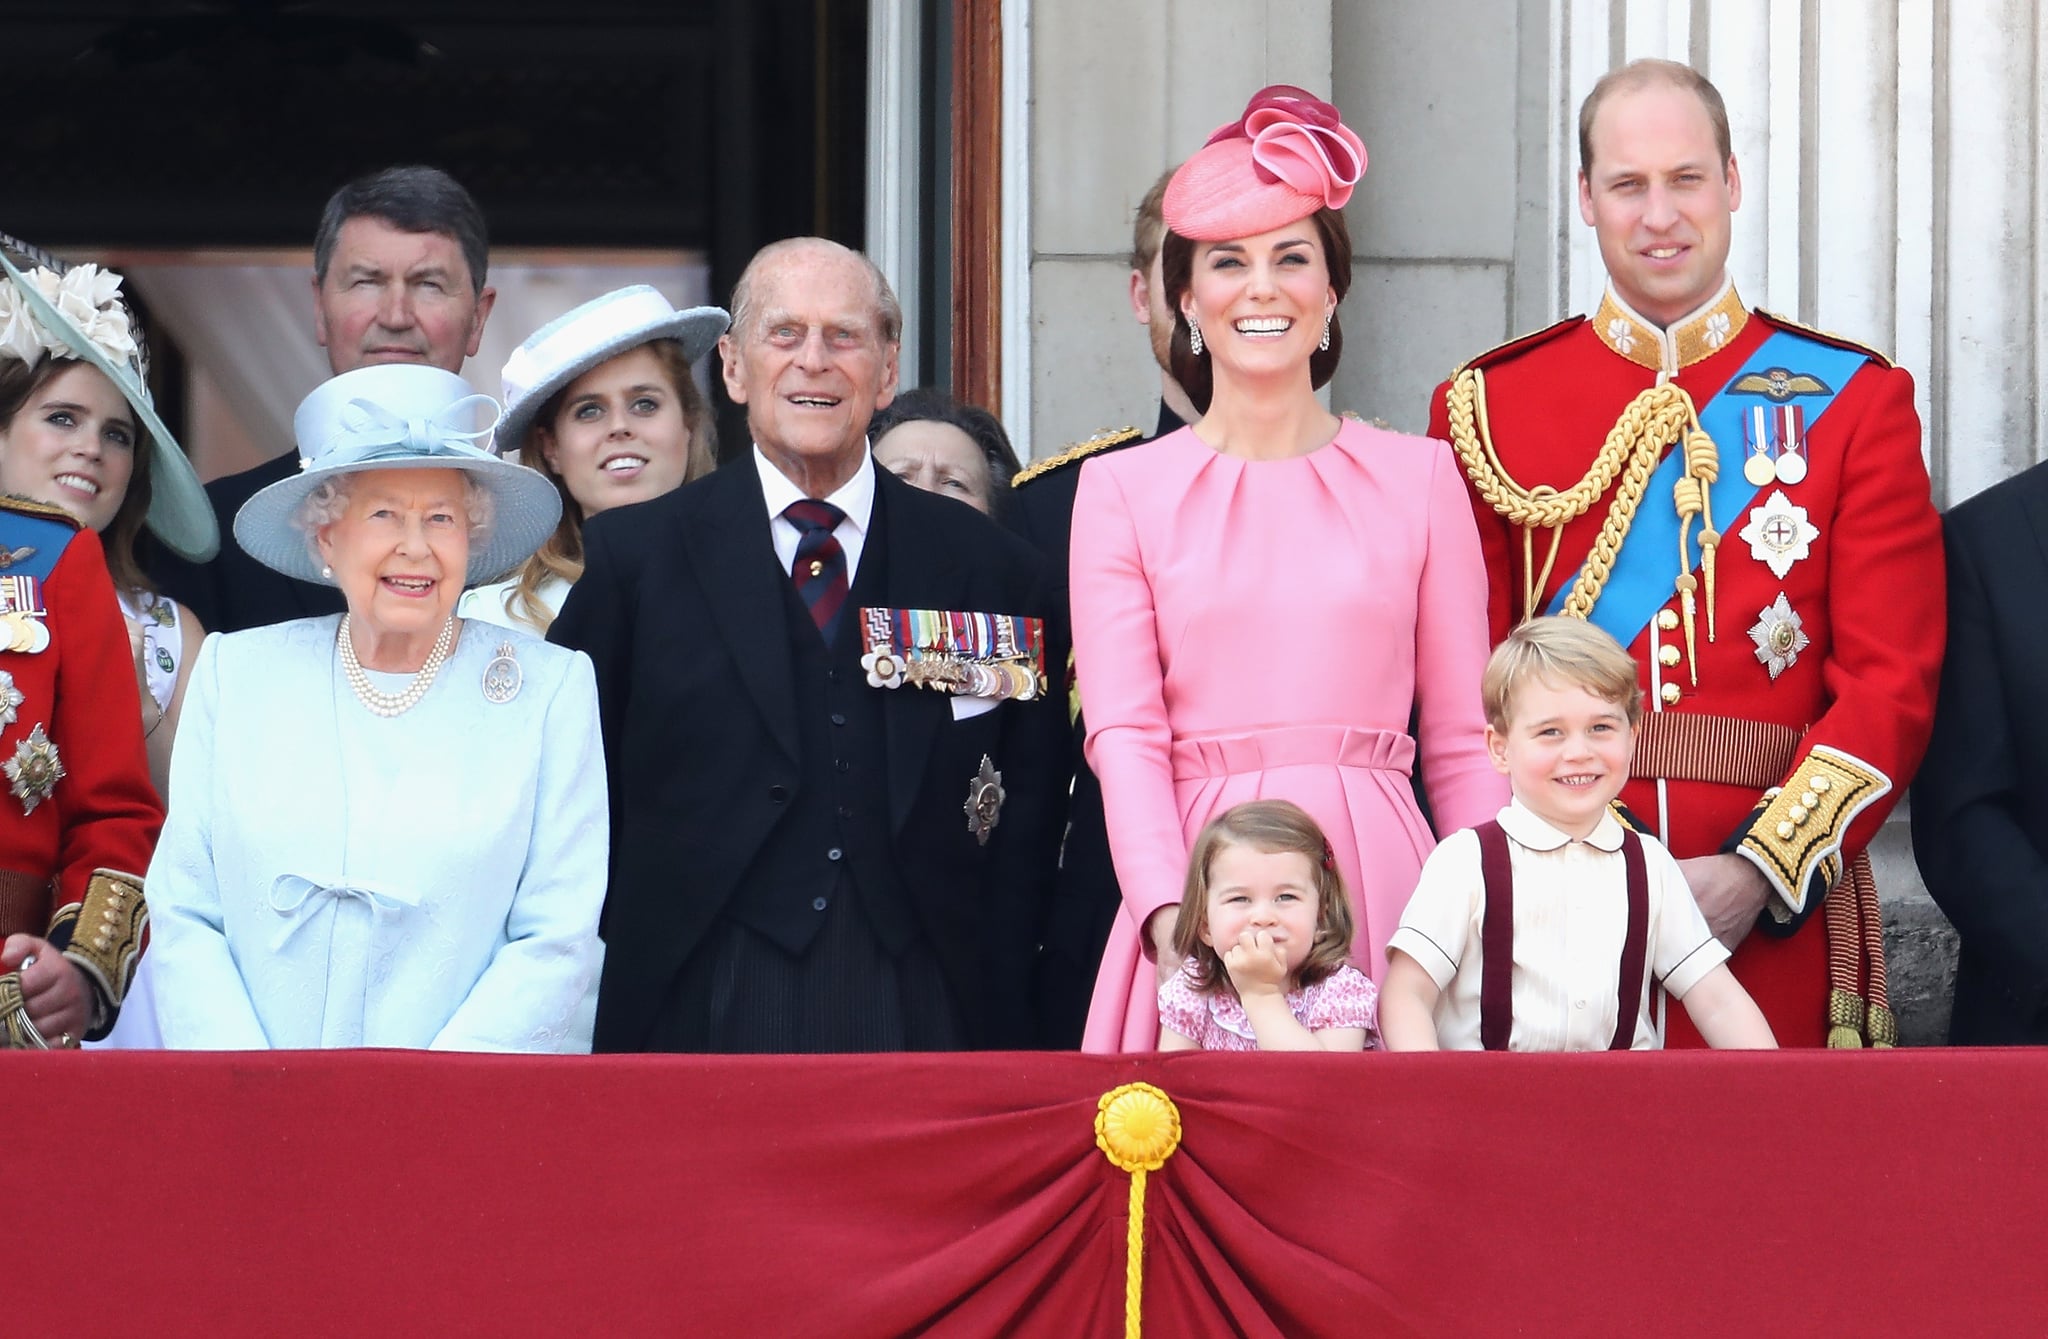 LONDON, ENGLAND - JUNE 17:  (L-R) Queen Elizabeth II, Prince Philip, Duke of Edinburgh, Catherine, Duchess of Cambridge, Princess Charlotte of Cambridge, Prince George of Cambridge and Prince William, Duke of Cambridge look out from the balcony of Buckingham Palace during the Trooping the Colour parade on June 17, 2017 in London, England.  (Photo by Chris Jackson/Getty Images)